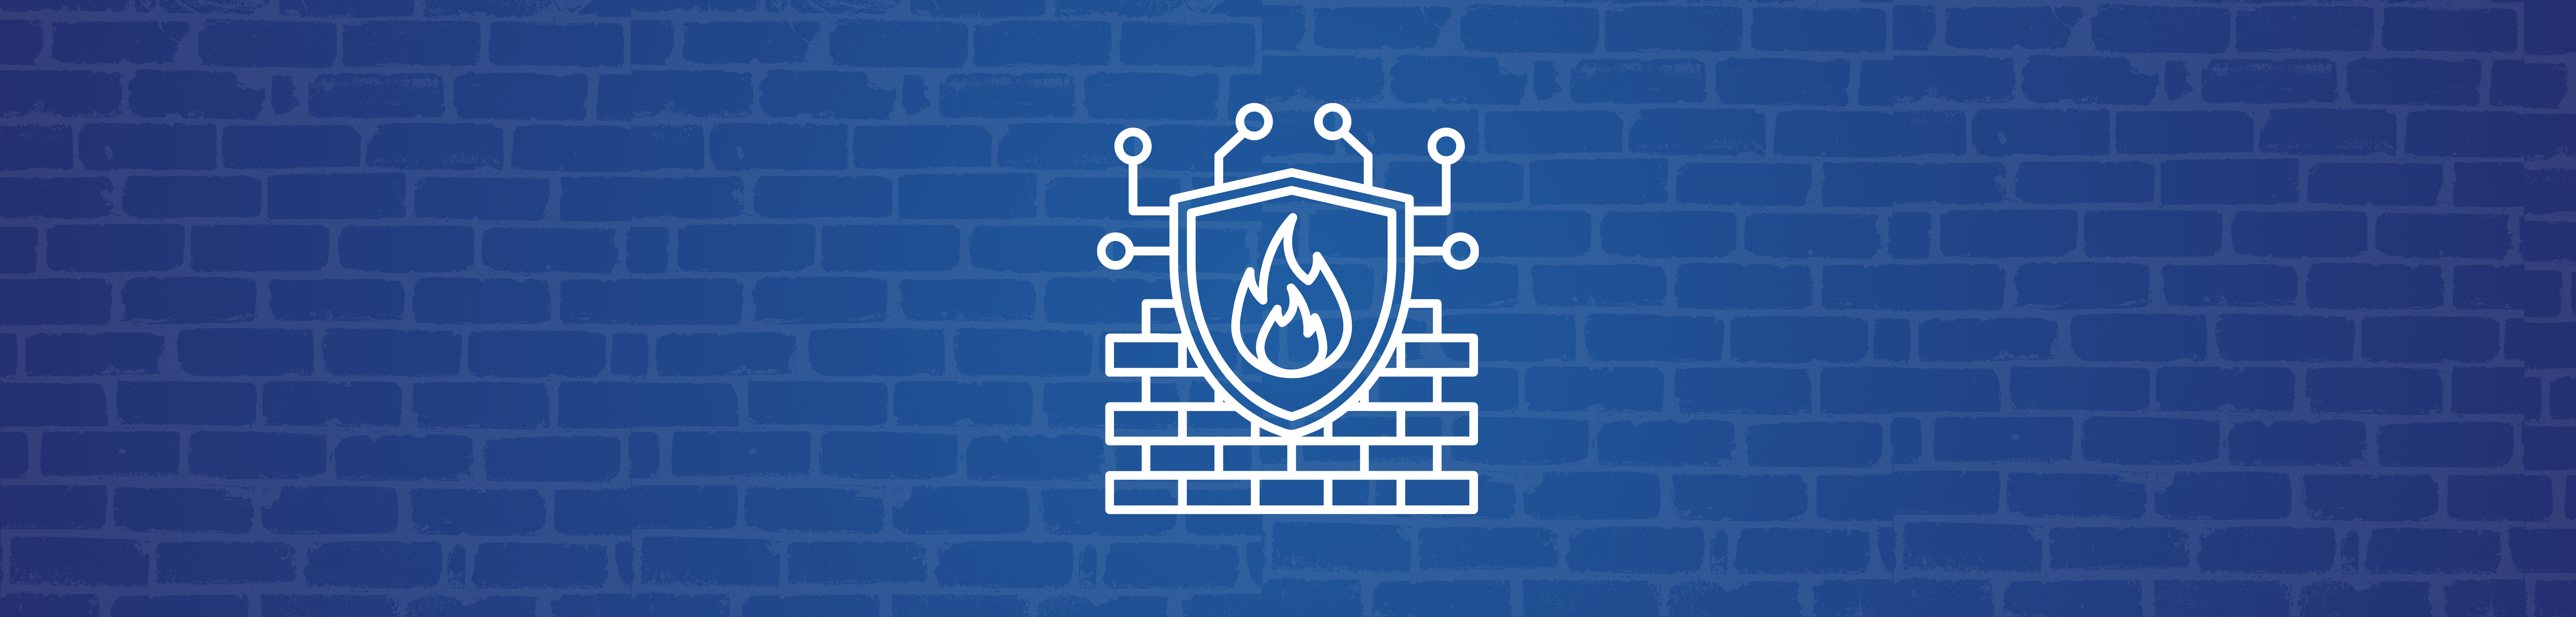 Types of firewalls and Best Practices in Cybersecurity image